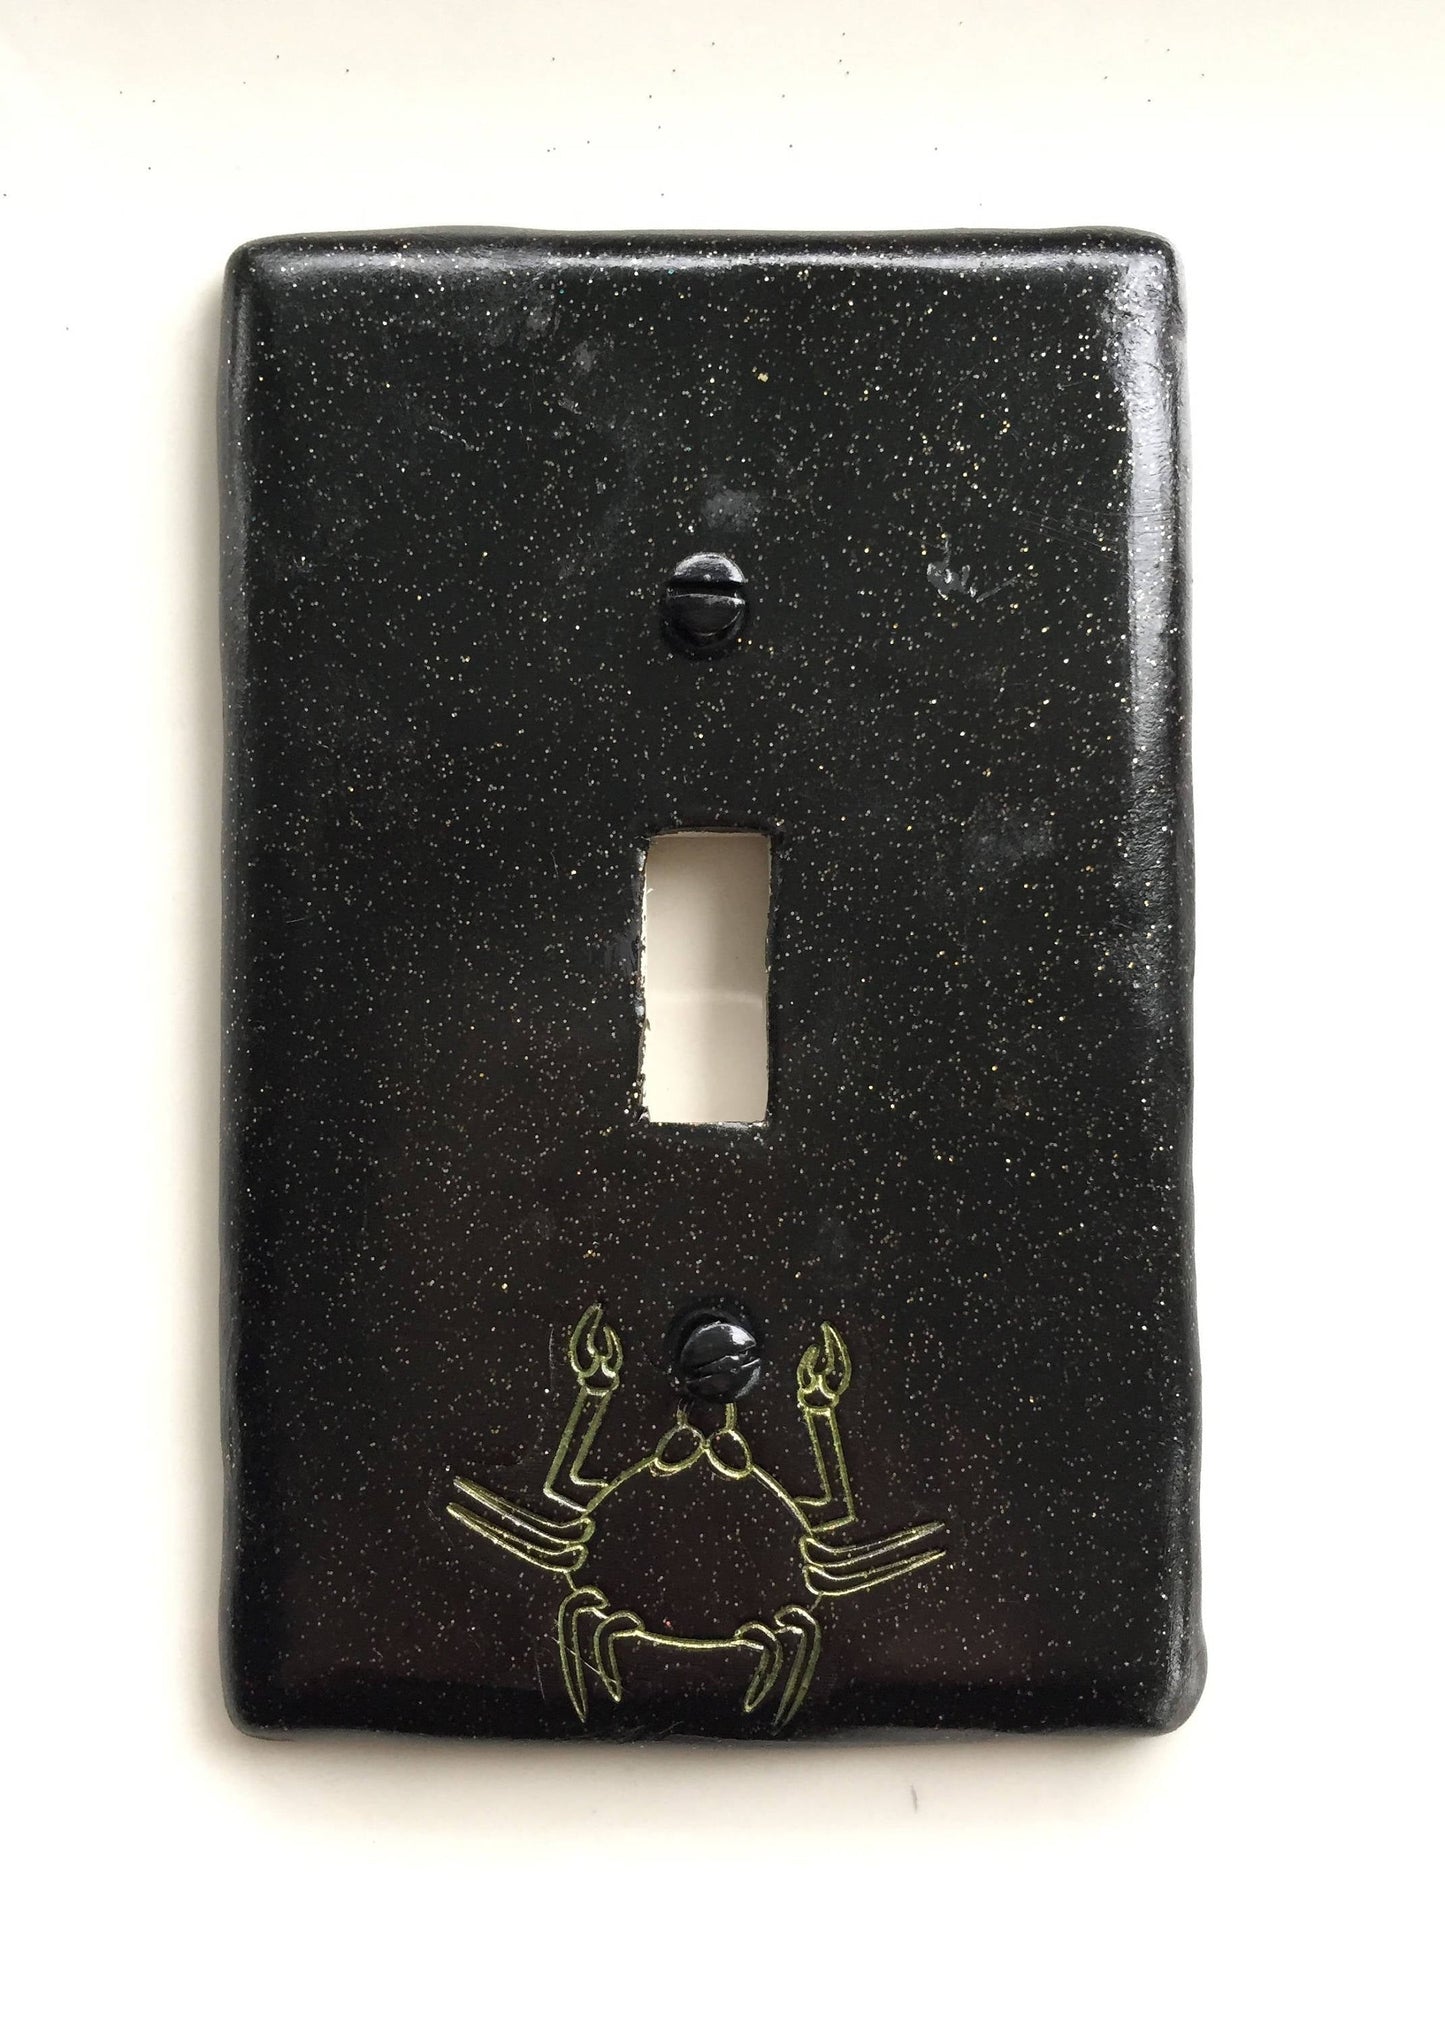 Cancer the Crab light switch plate cover for single toggle switch plate cover, black with glitter green custom colors available